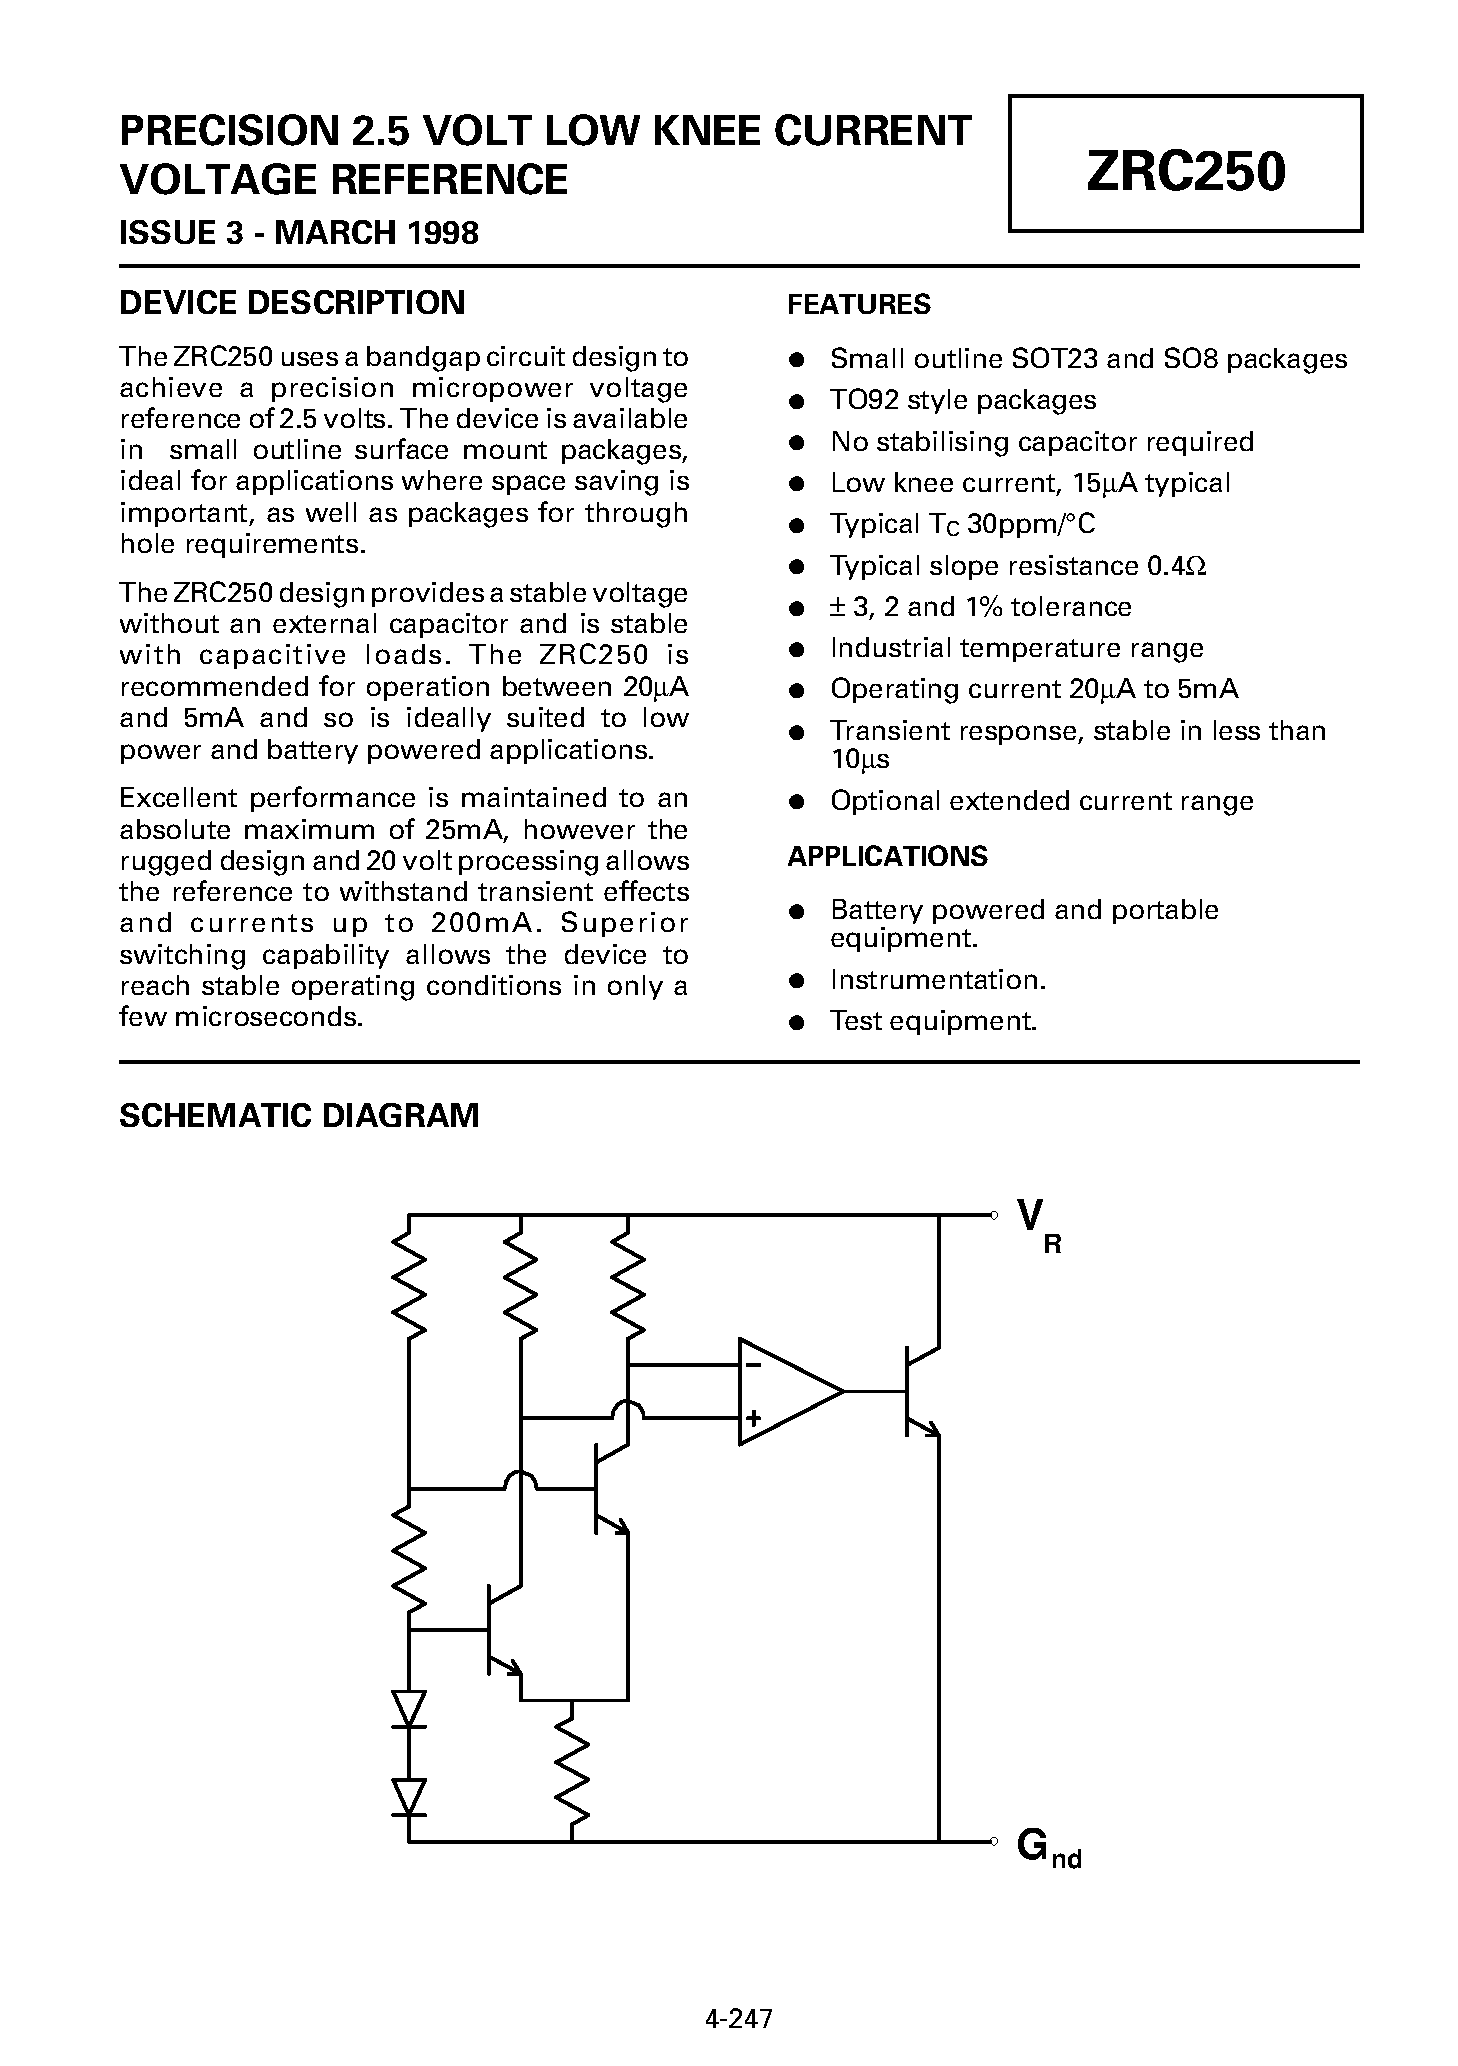 Datasheet ZRC250R02 - PRECISION 2.5 VOLT LOW KNEE CURRENT VOLTAGE REFERENCE page 1